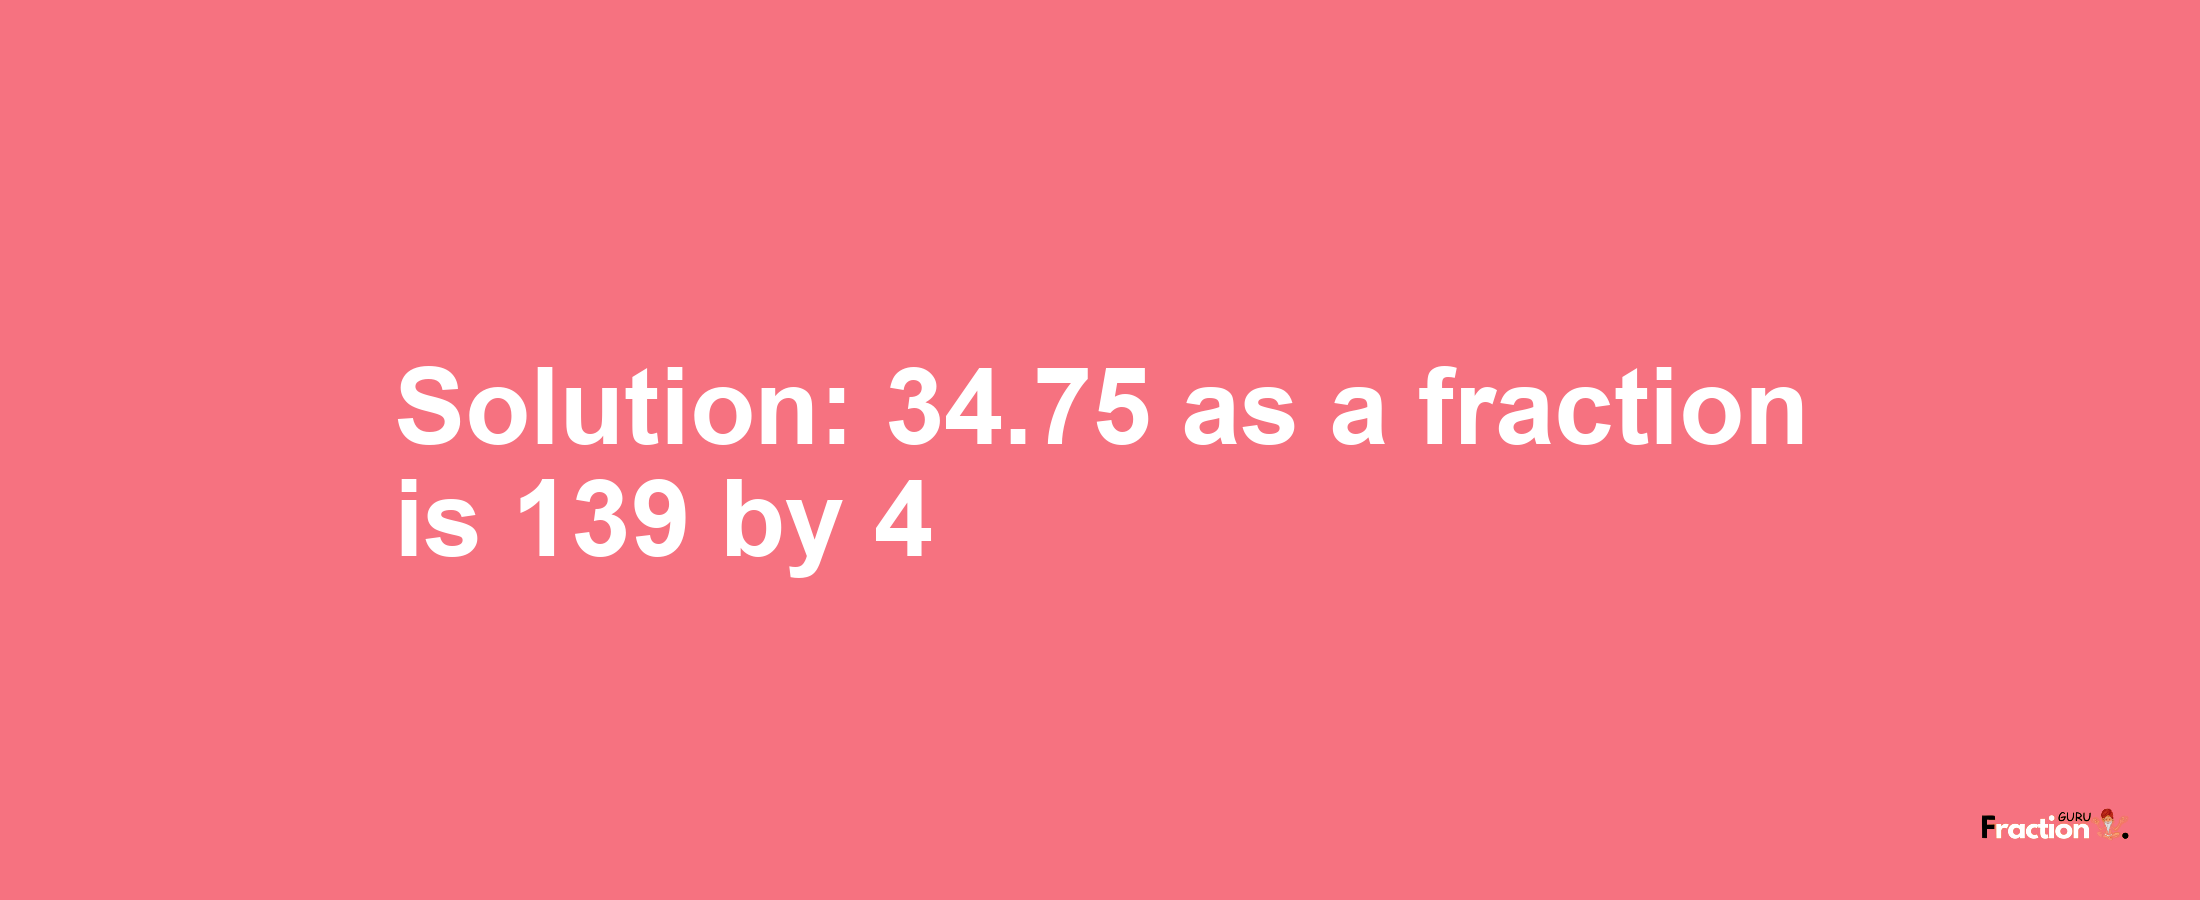 Solution:34.75 as a fraction is 139/4